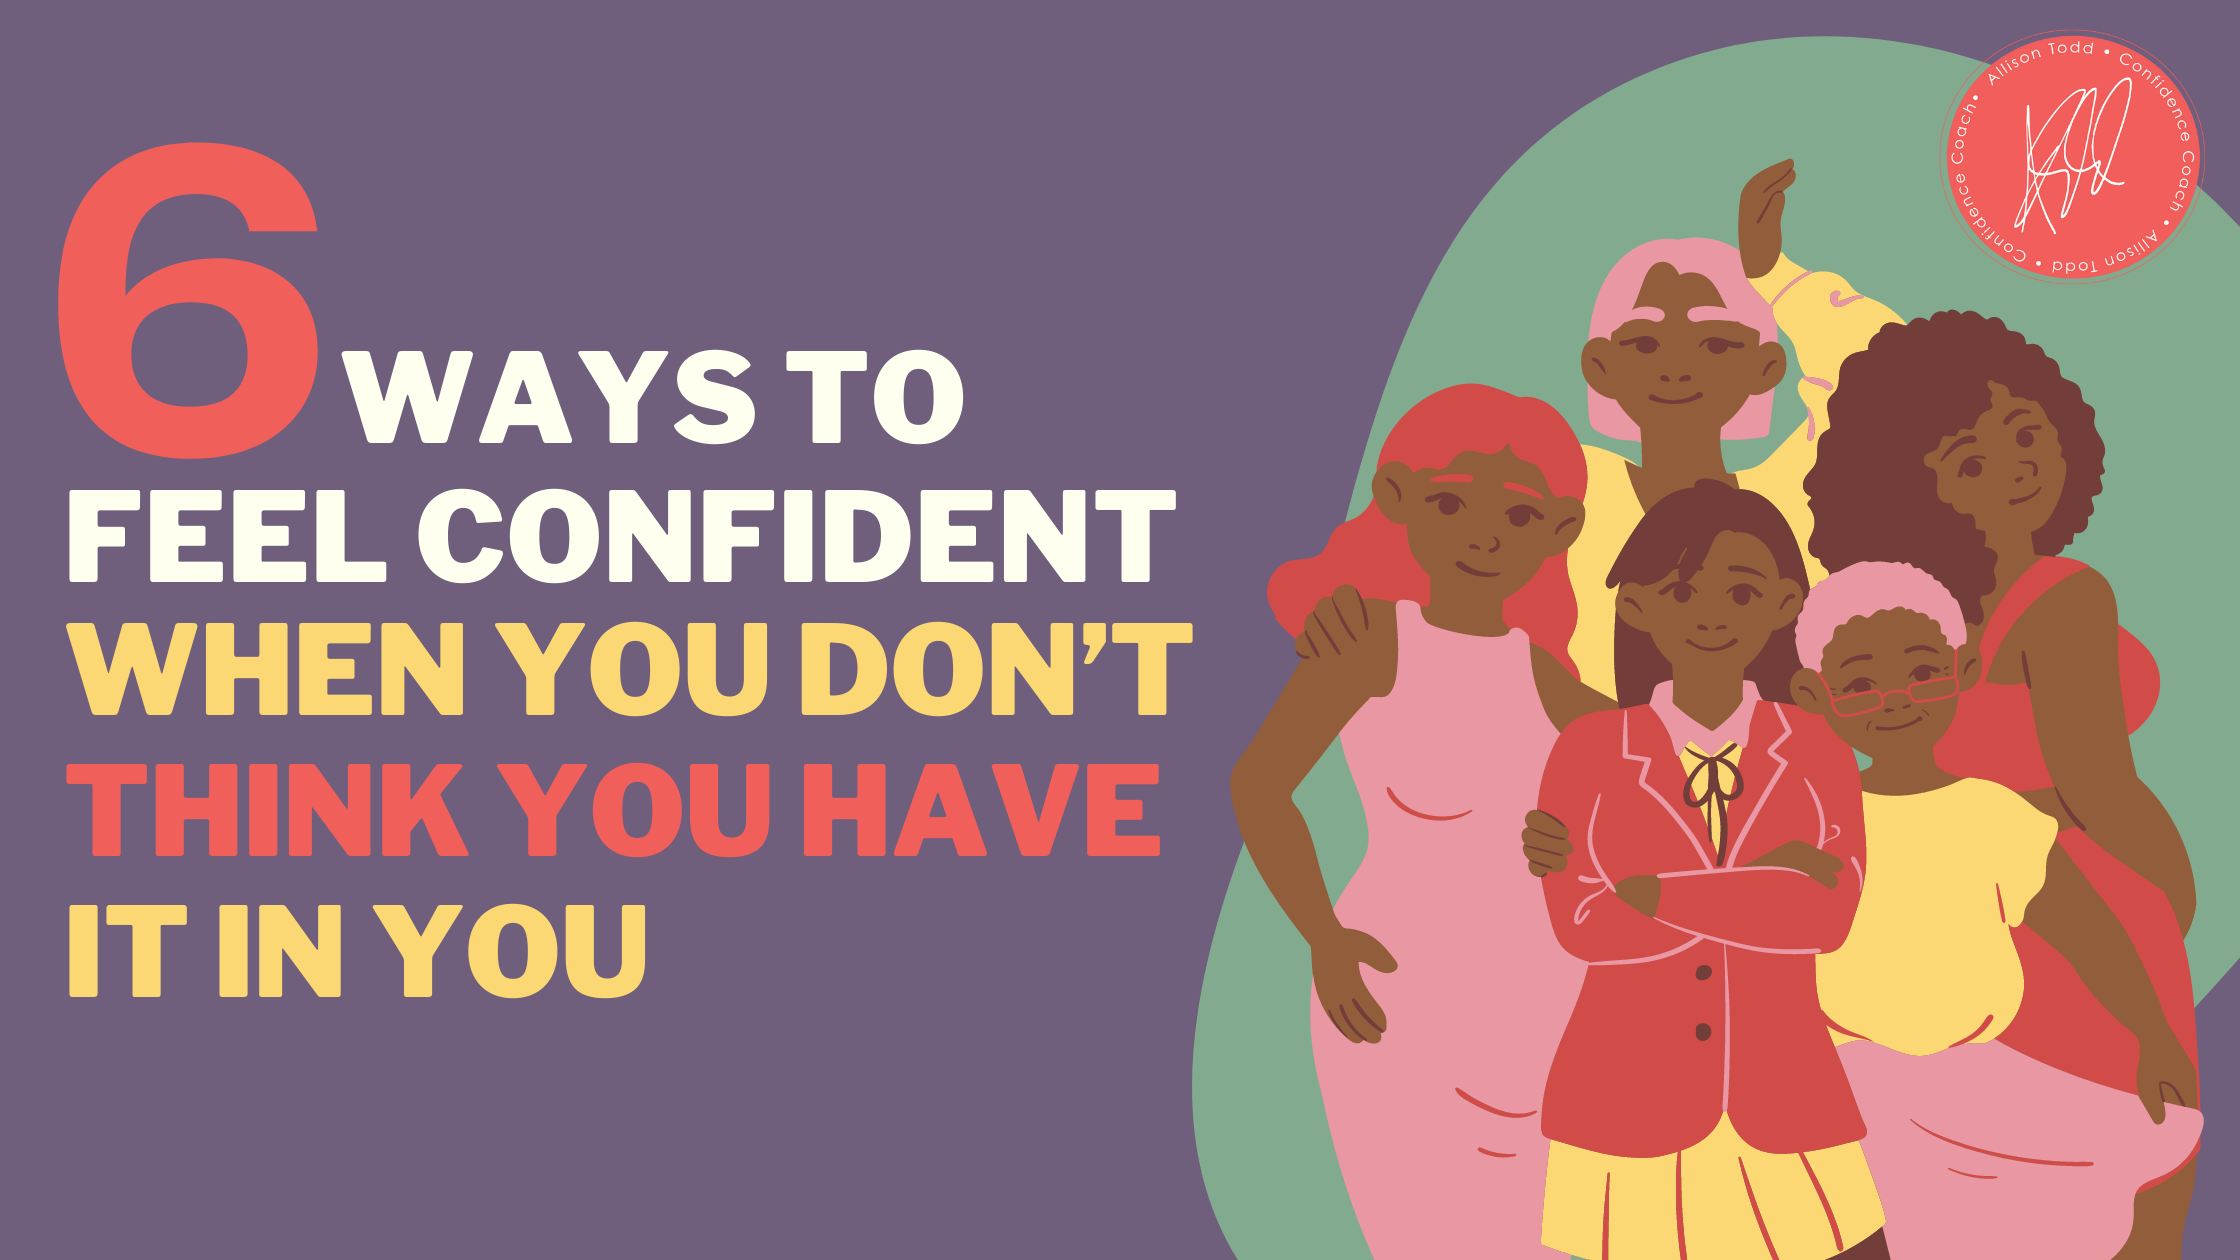 6 Ways to Feel Confident When You Don’t Think You Have It in You